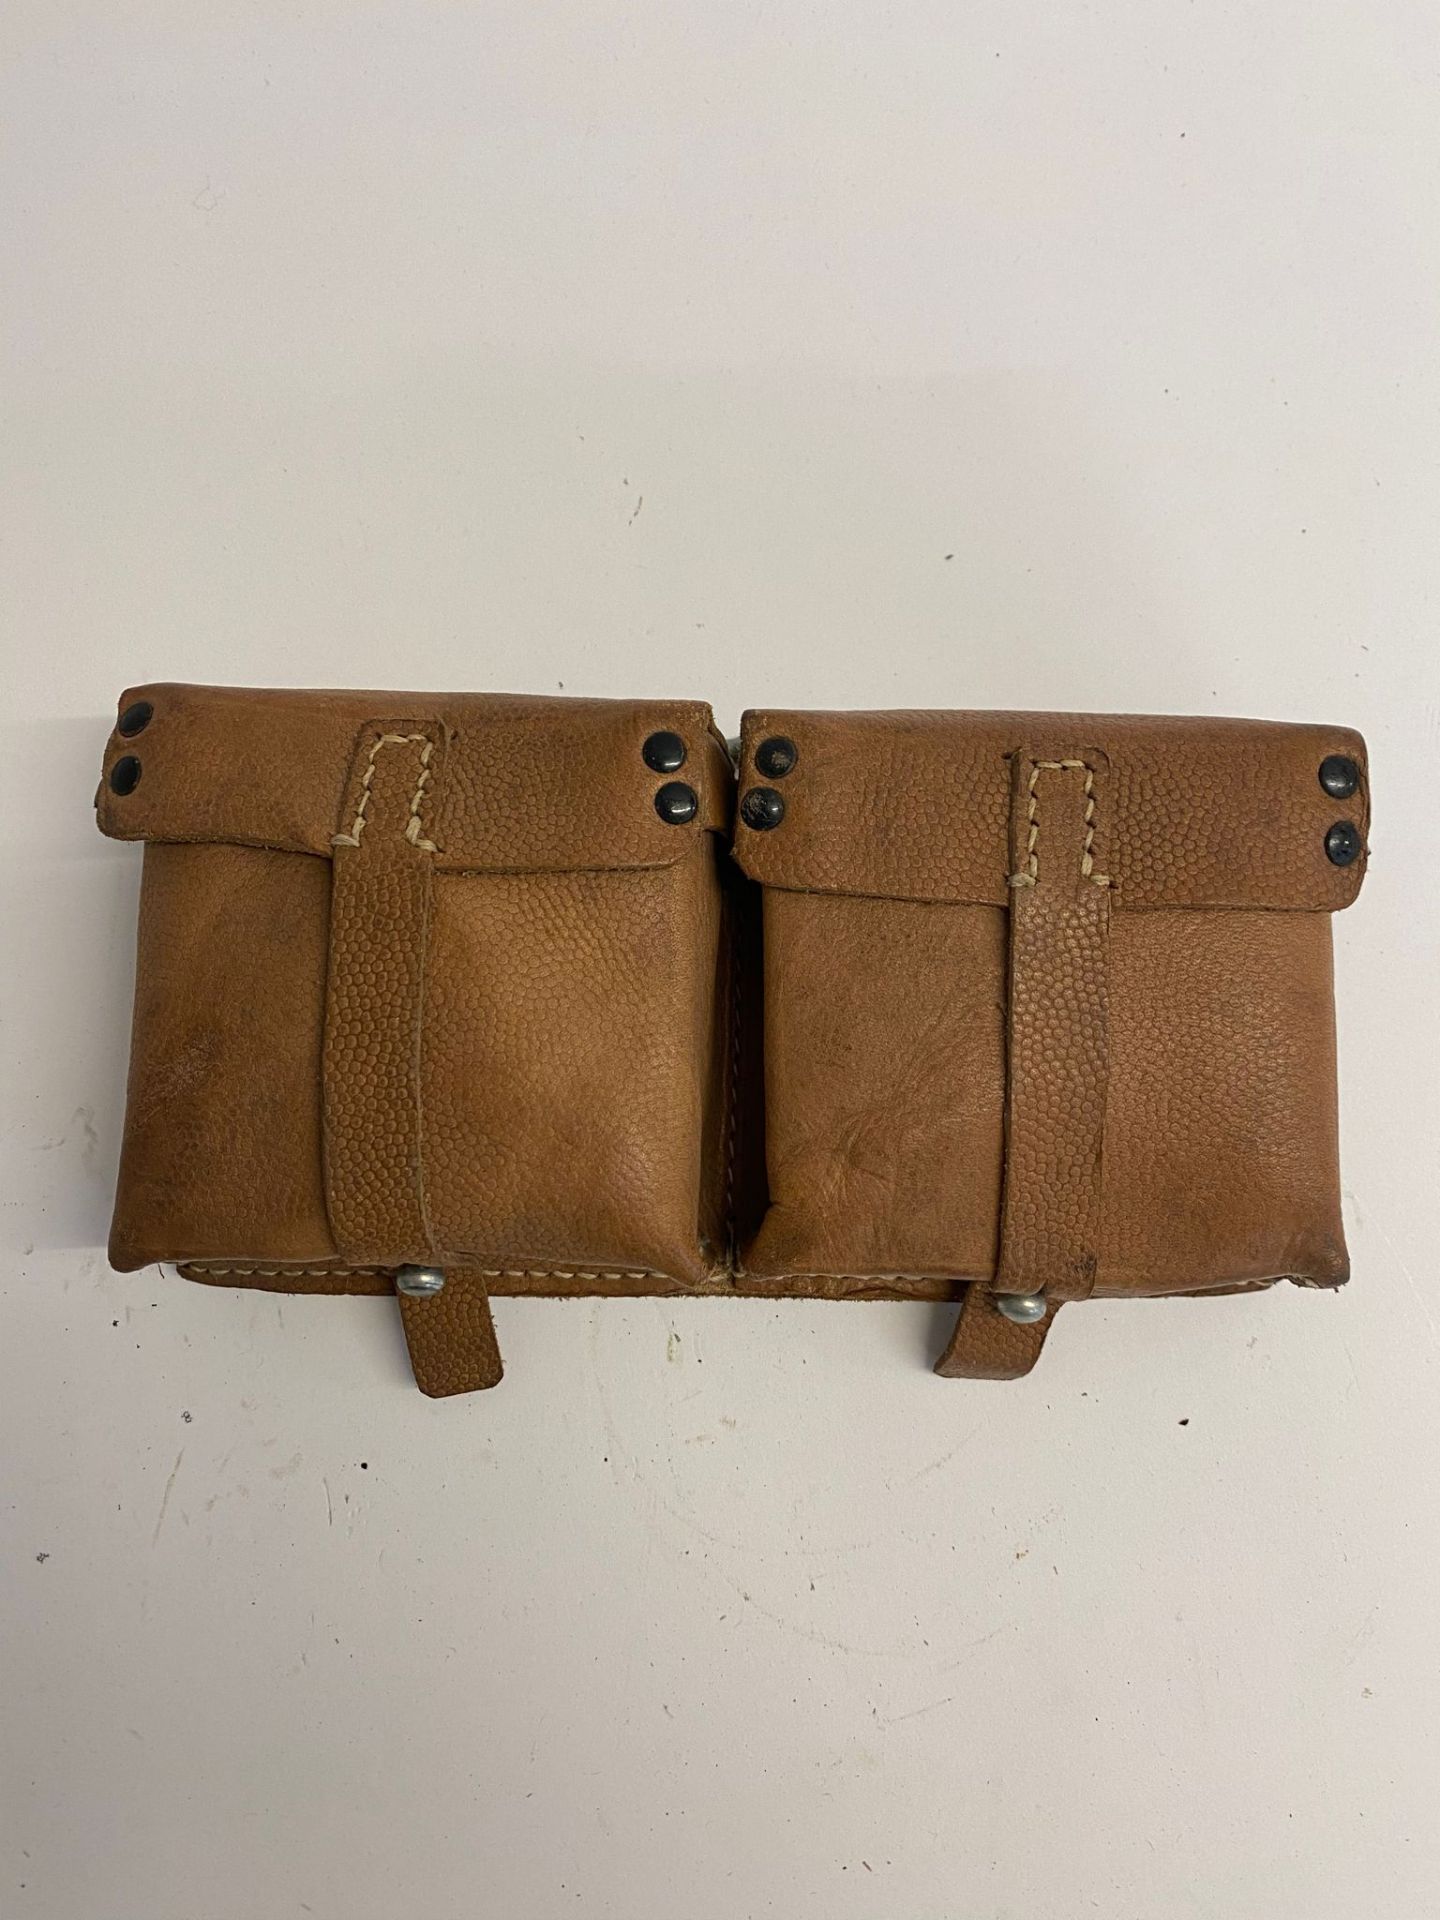 A WWII German G43/K43 ammo pouch having 'ros' maker mark and dated 1944. This lot will be